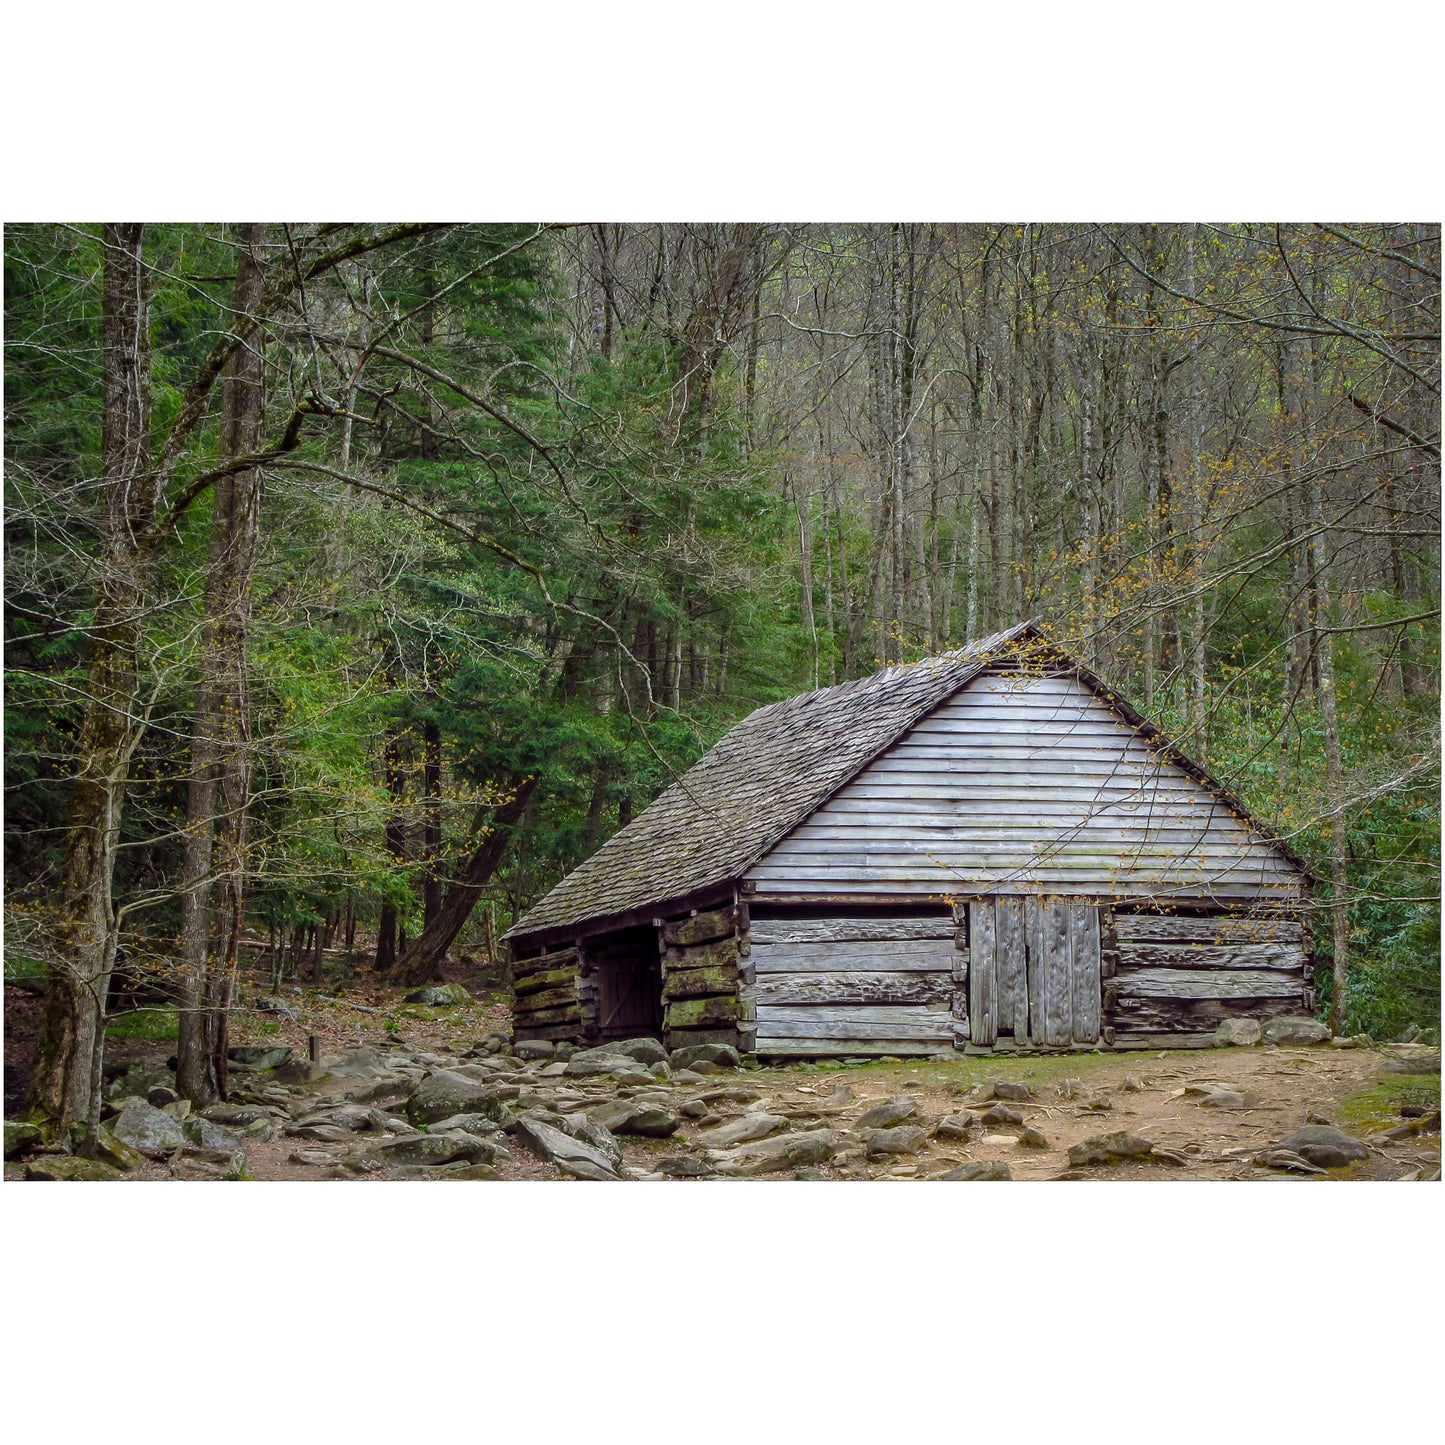 photography print of bud ogle barn in the smoky mountains